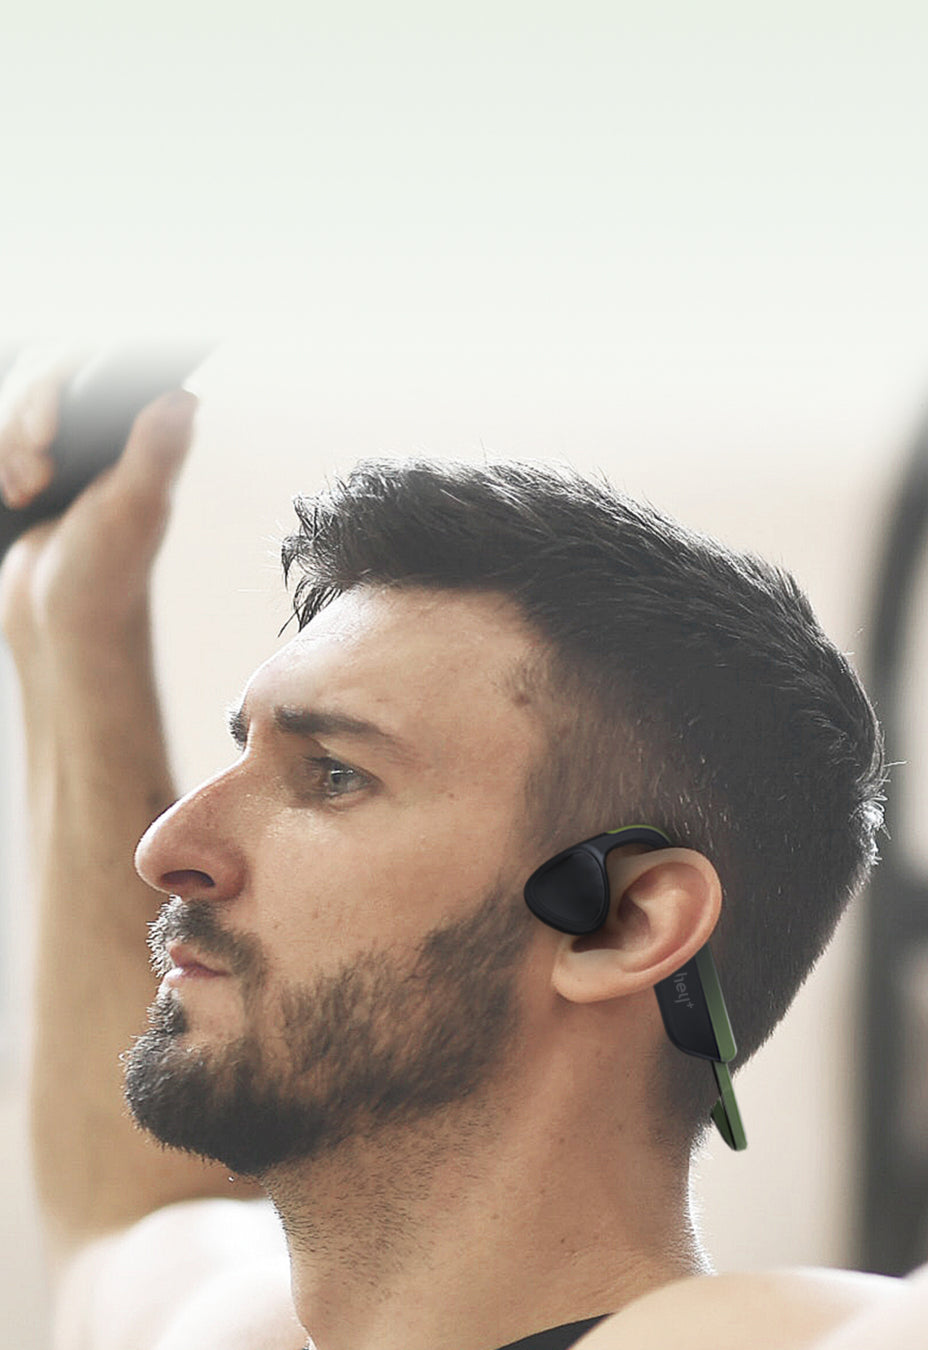 heyplus Runner is your safe and comfortable fitness buddy with open-ear bone conduction acoustics, featuring 33g ultra-light for comfortable wear, IP67 waterproof, Bluetooth 5.0, 16G memory for offline music playback, and more.